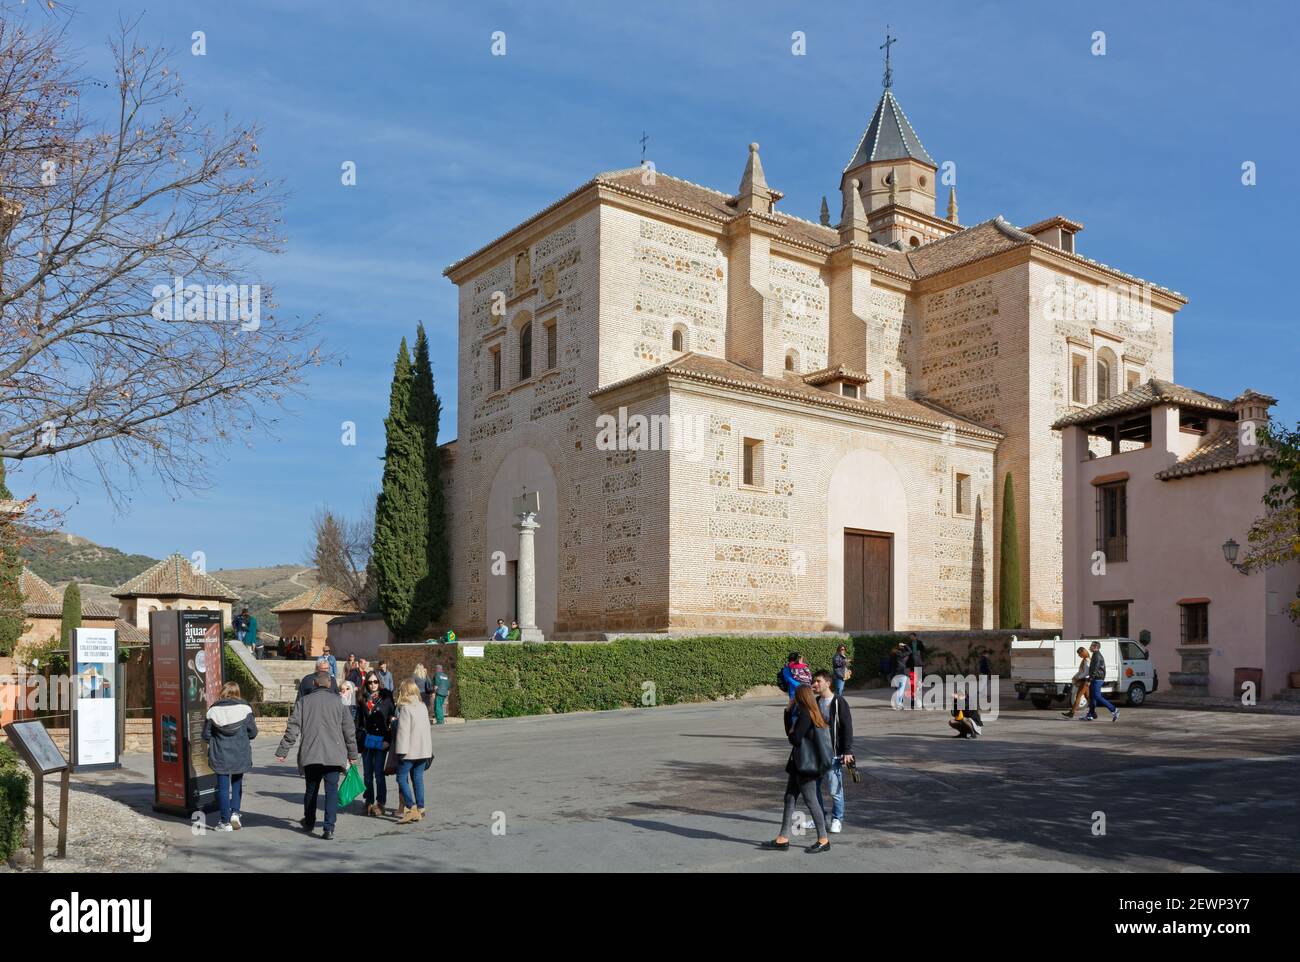 GRANADA, Spain - December 28, 2015: Tourists outside the catholic church of Saint Mary of the Incarnation in the Alhambra complex Stock Photo